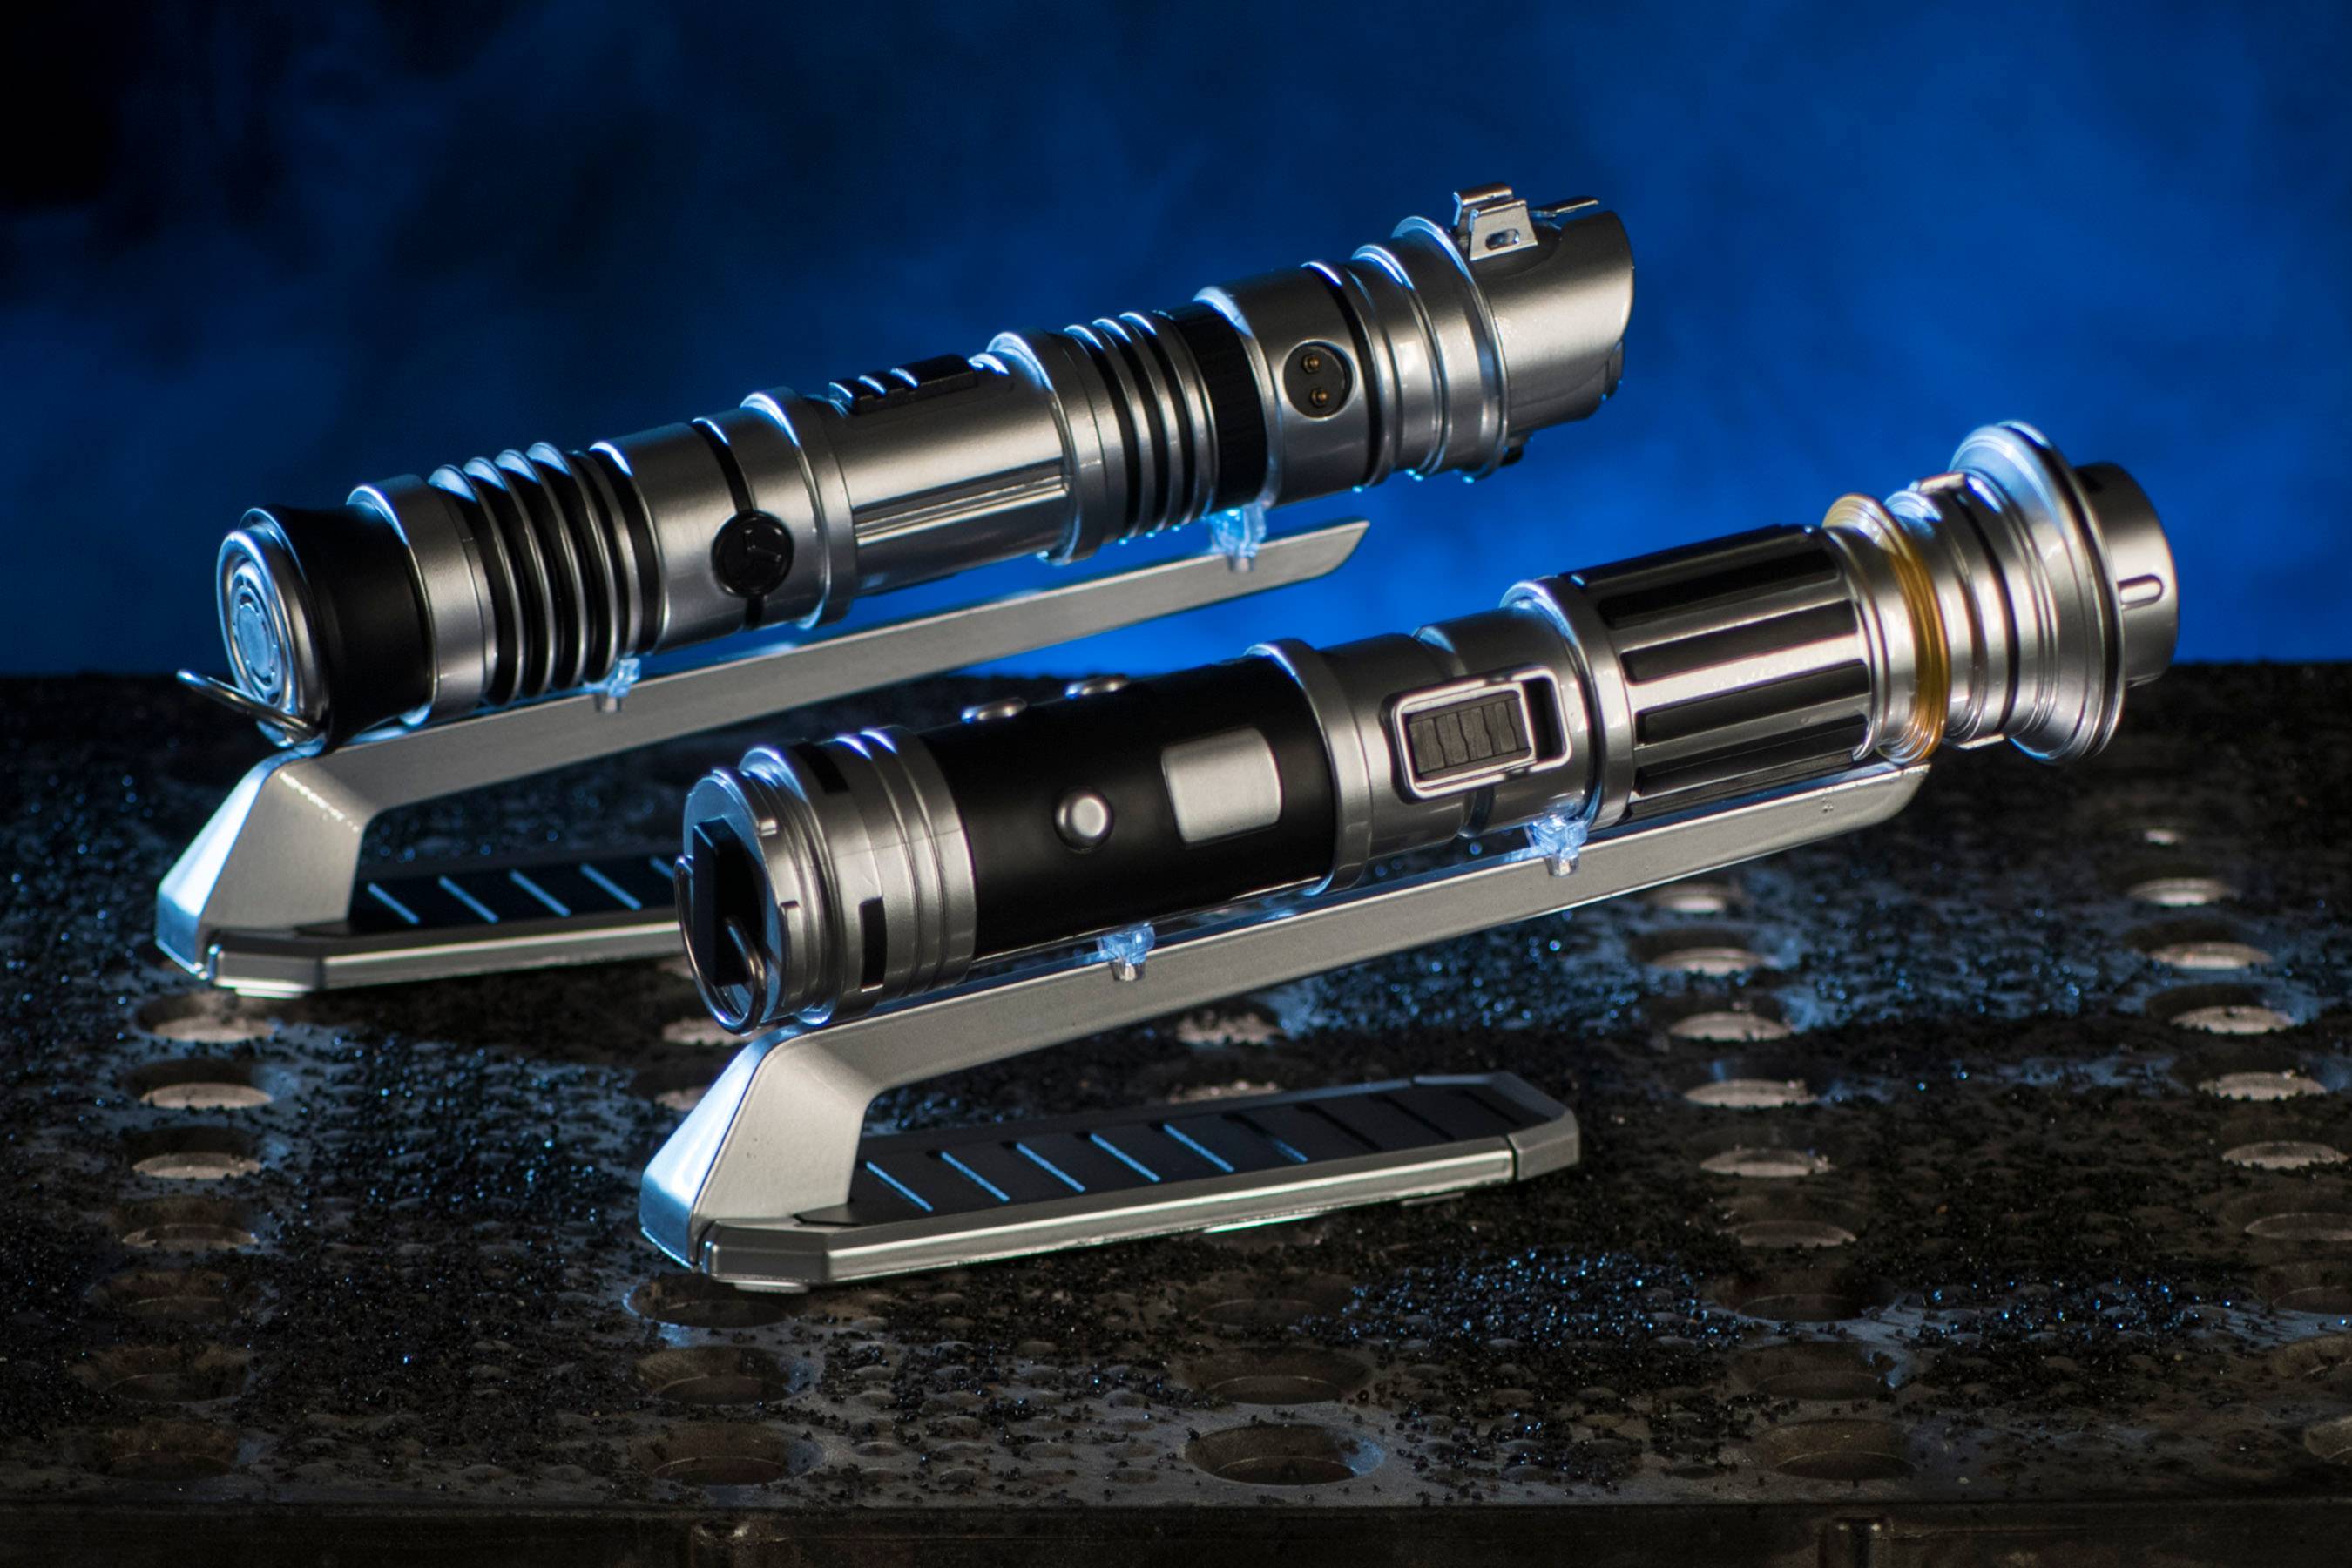 Building your own customized lightsaber in Savi's Workshop at Star Wars Galaxy's Edge